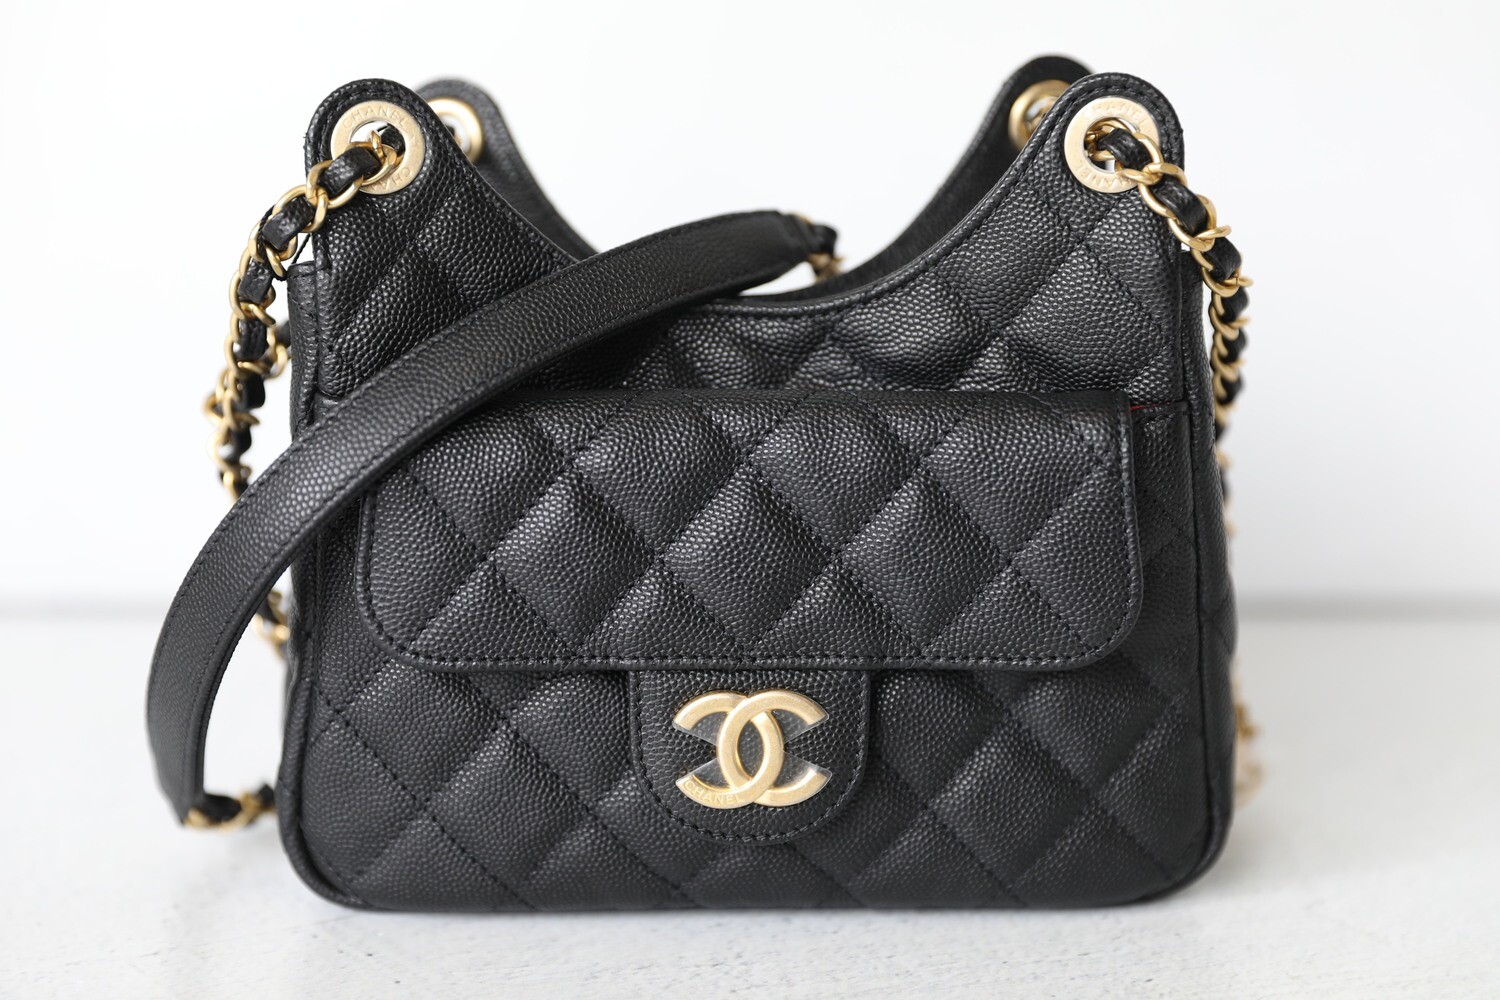 USED Chanel Black Lambskin Quilted Crush on Chains Hobo Bag AUTHENTIC